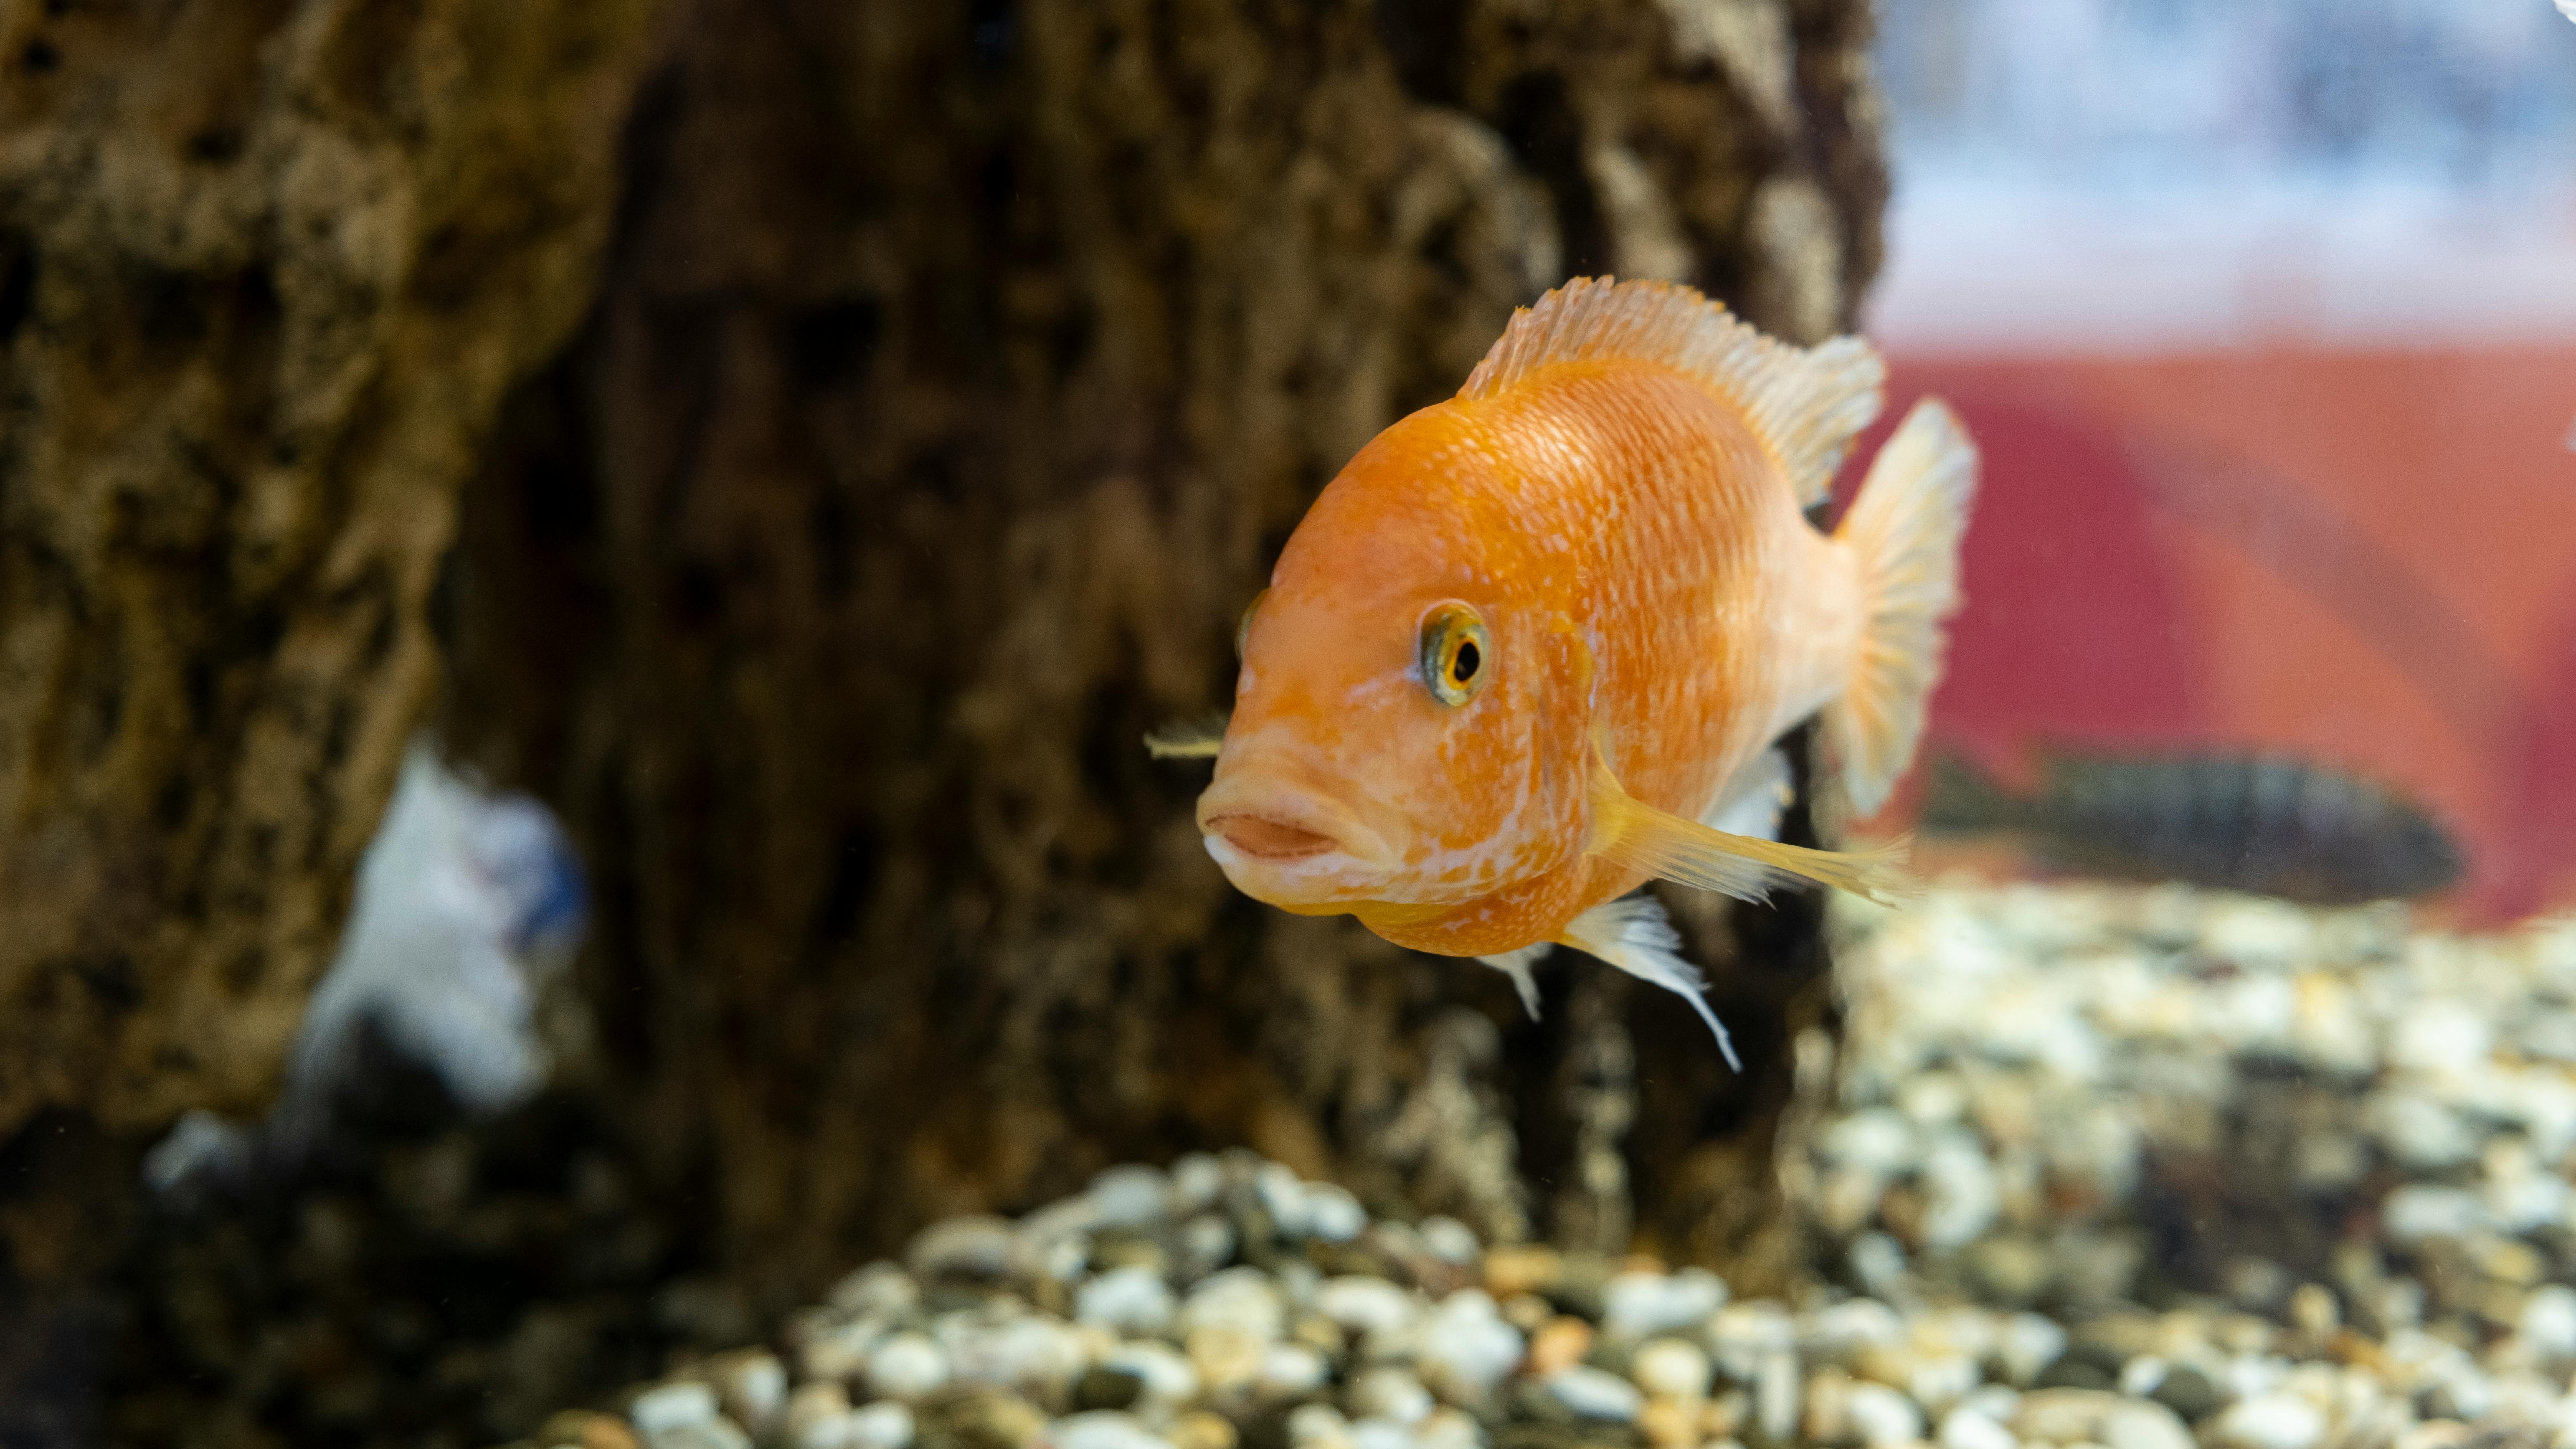 Common Mistakes To Avoid In Tropical Fishkeeping